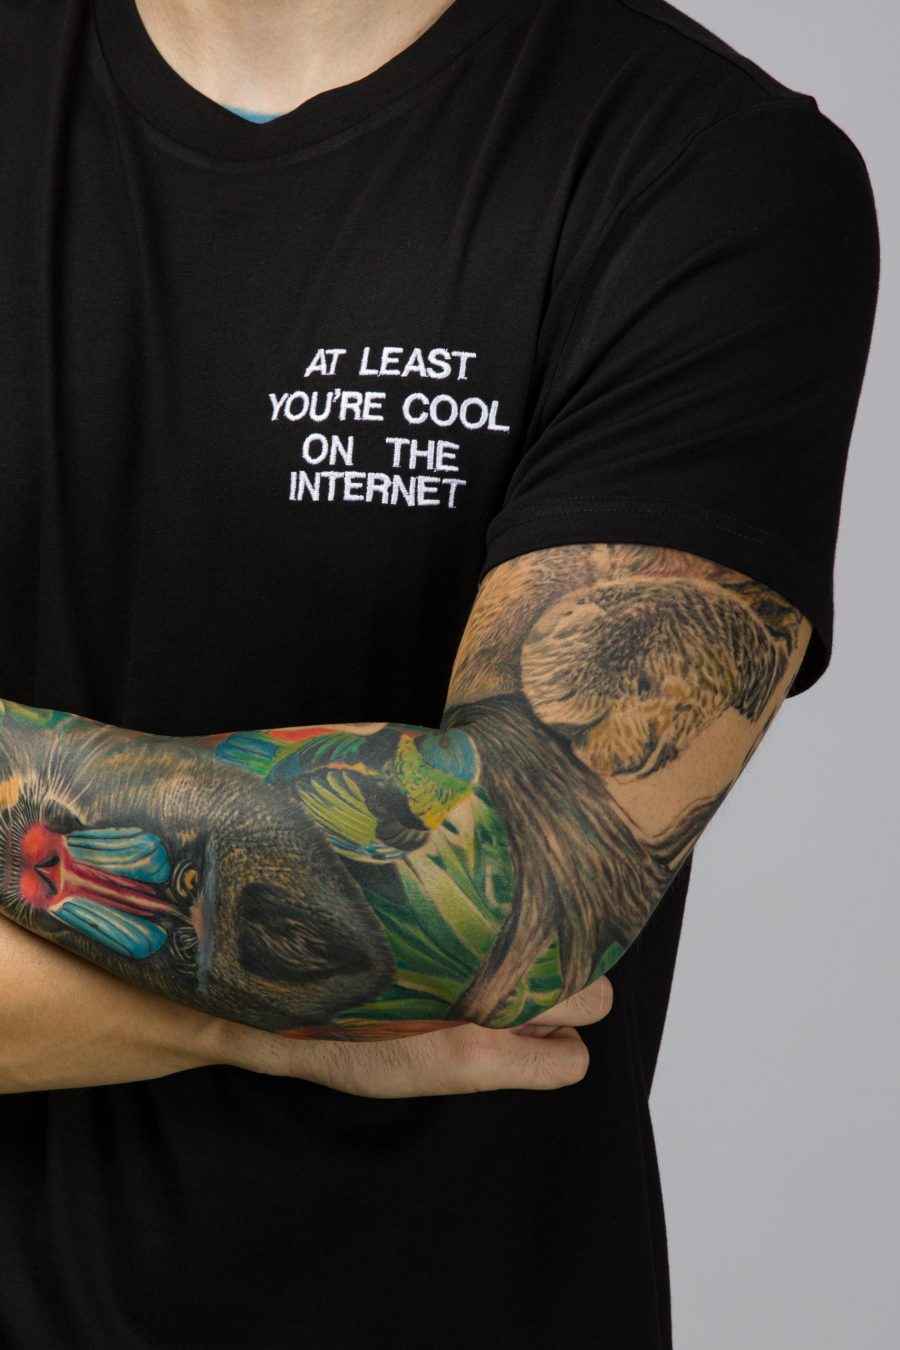 At least you’re cool on the internet